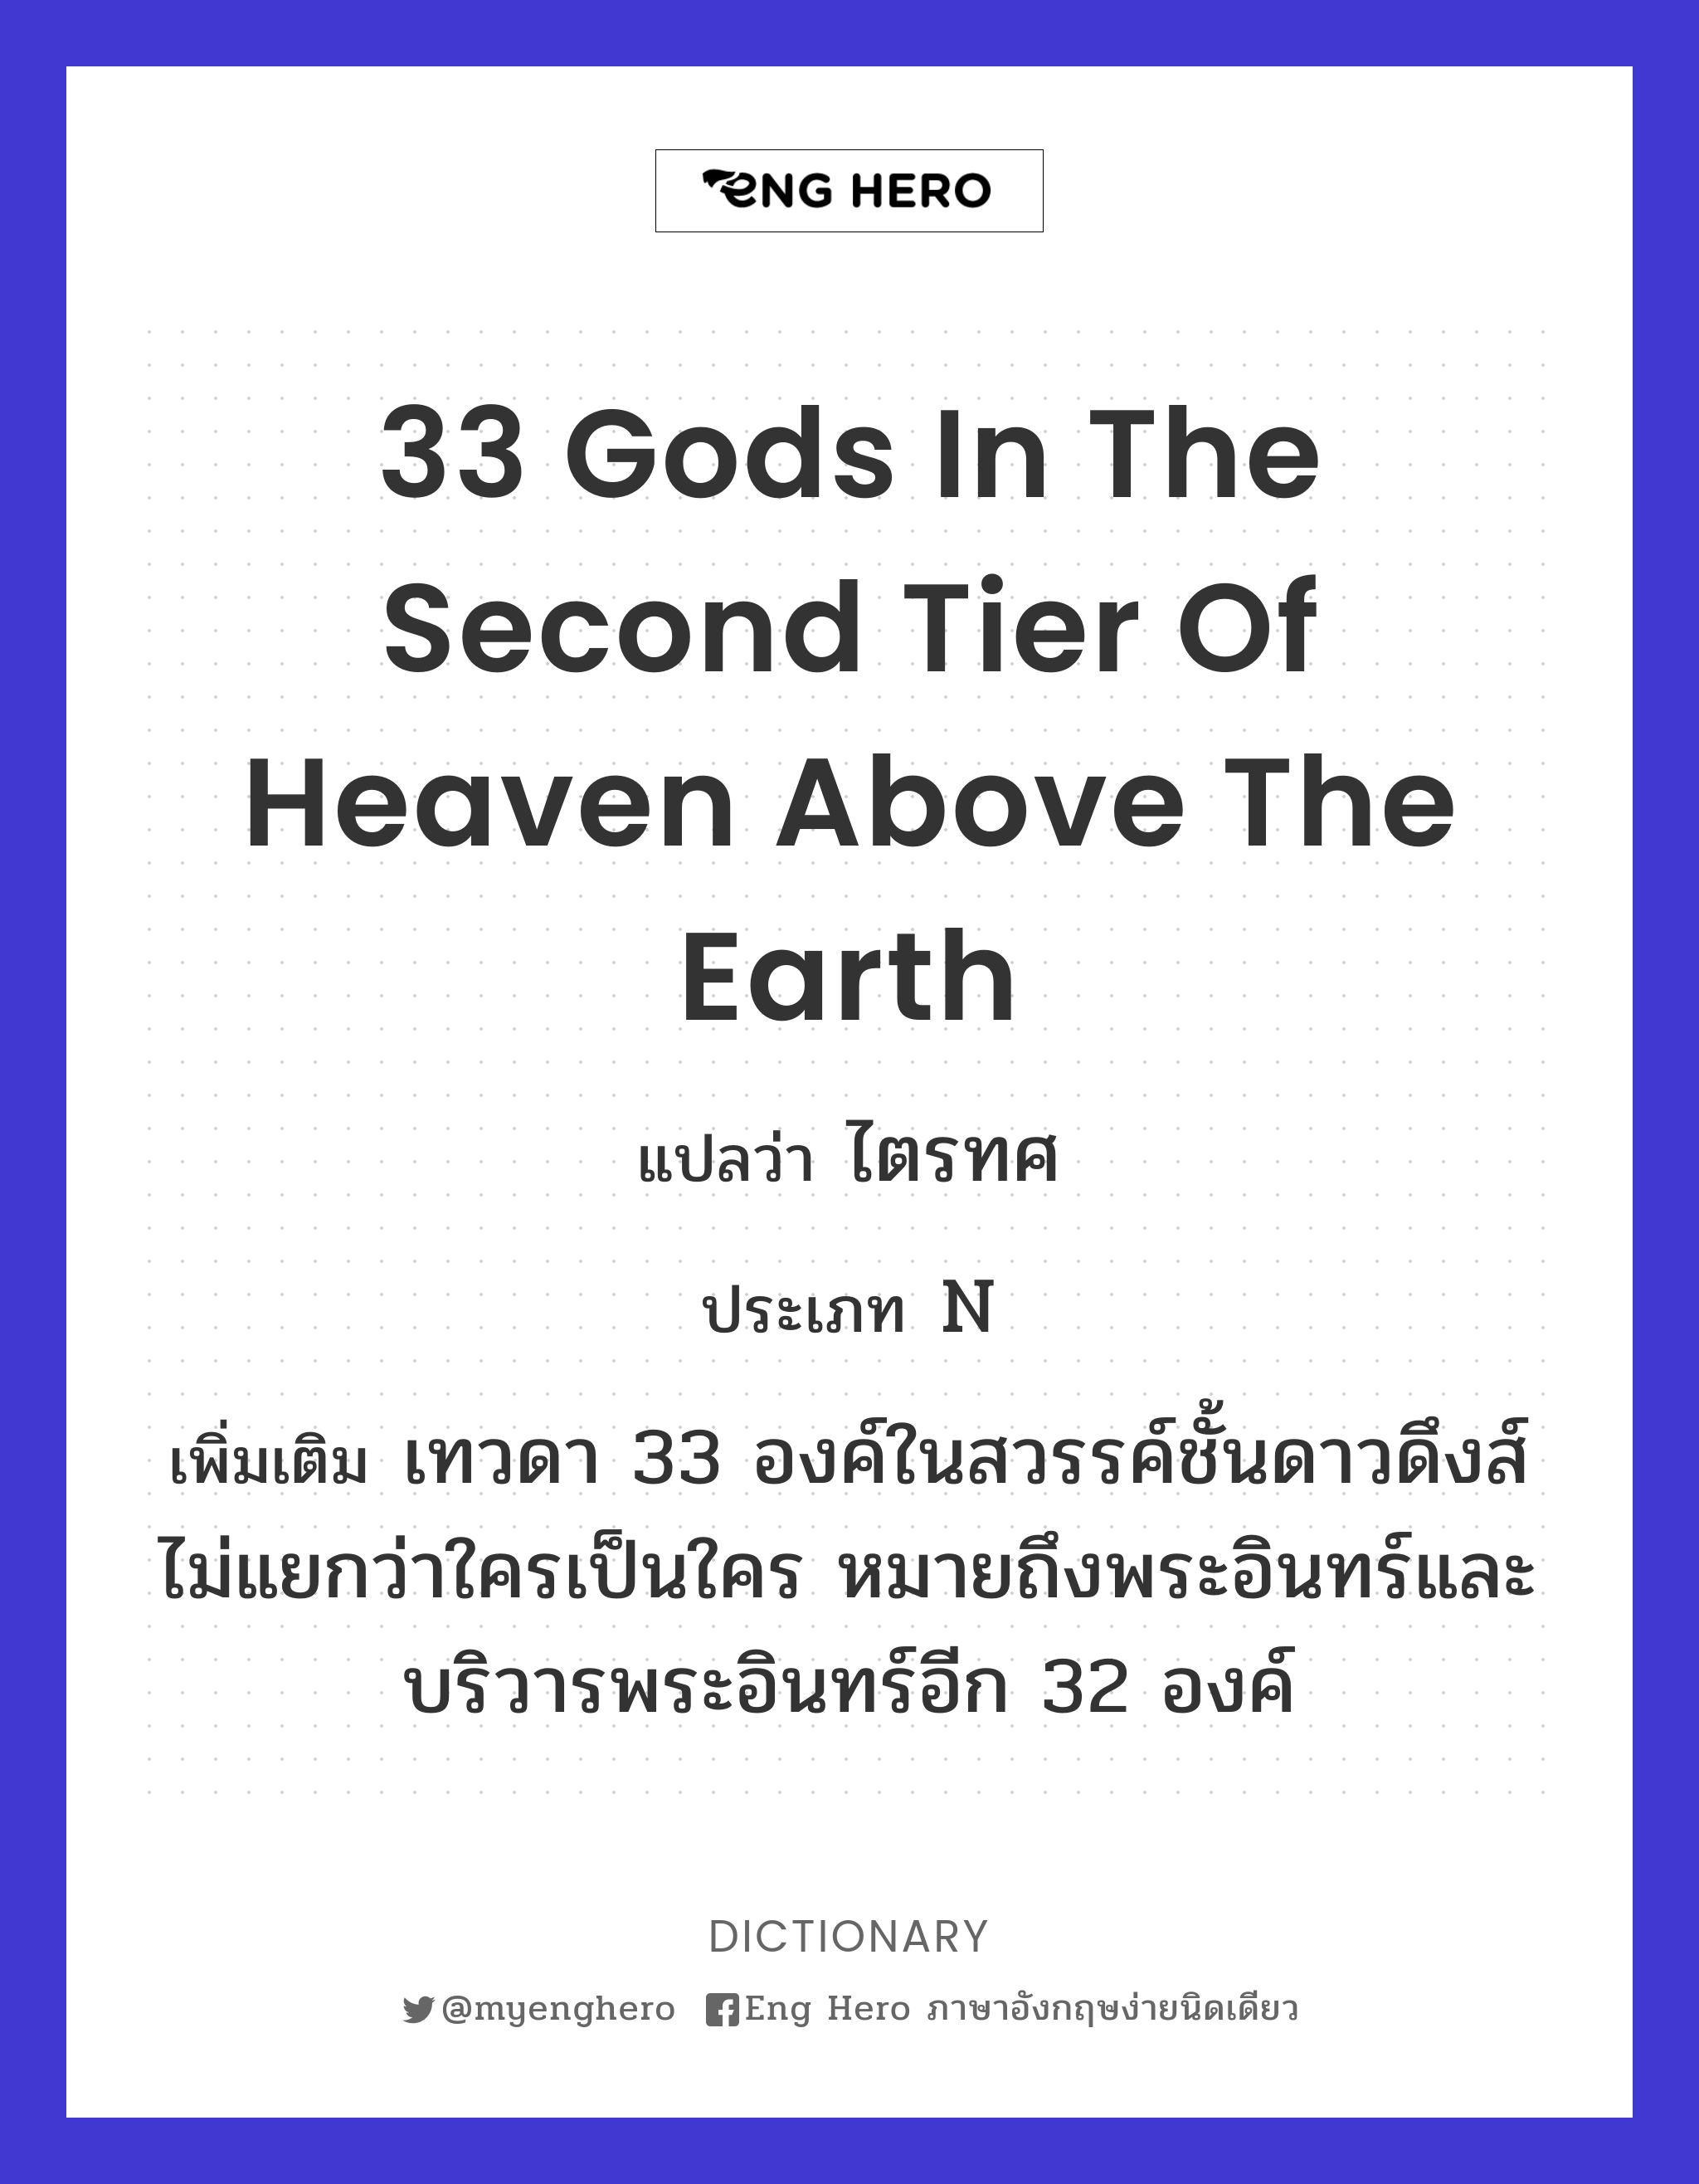 33 Gods in the second tier of heaven above the earth